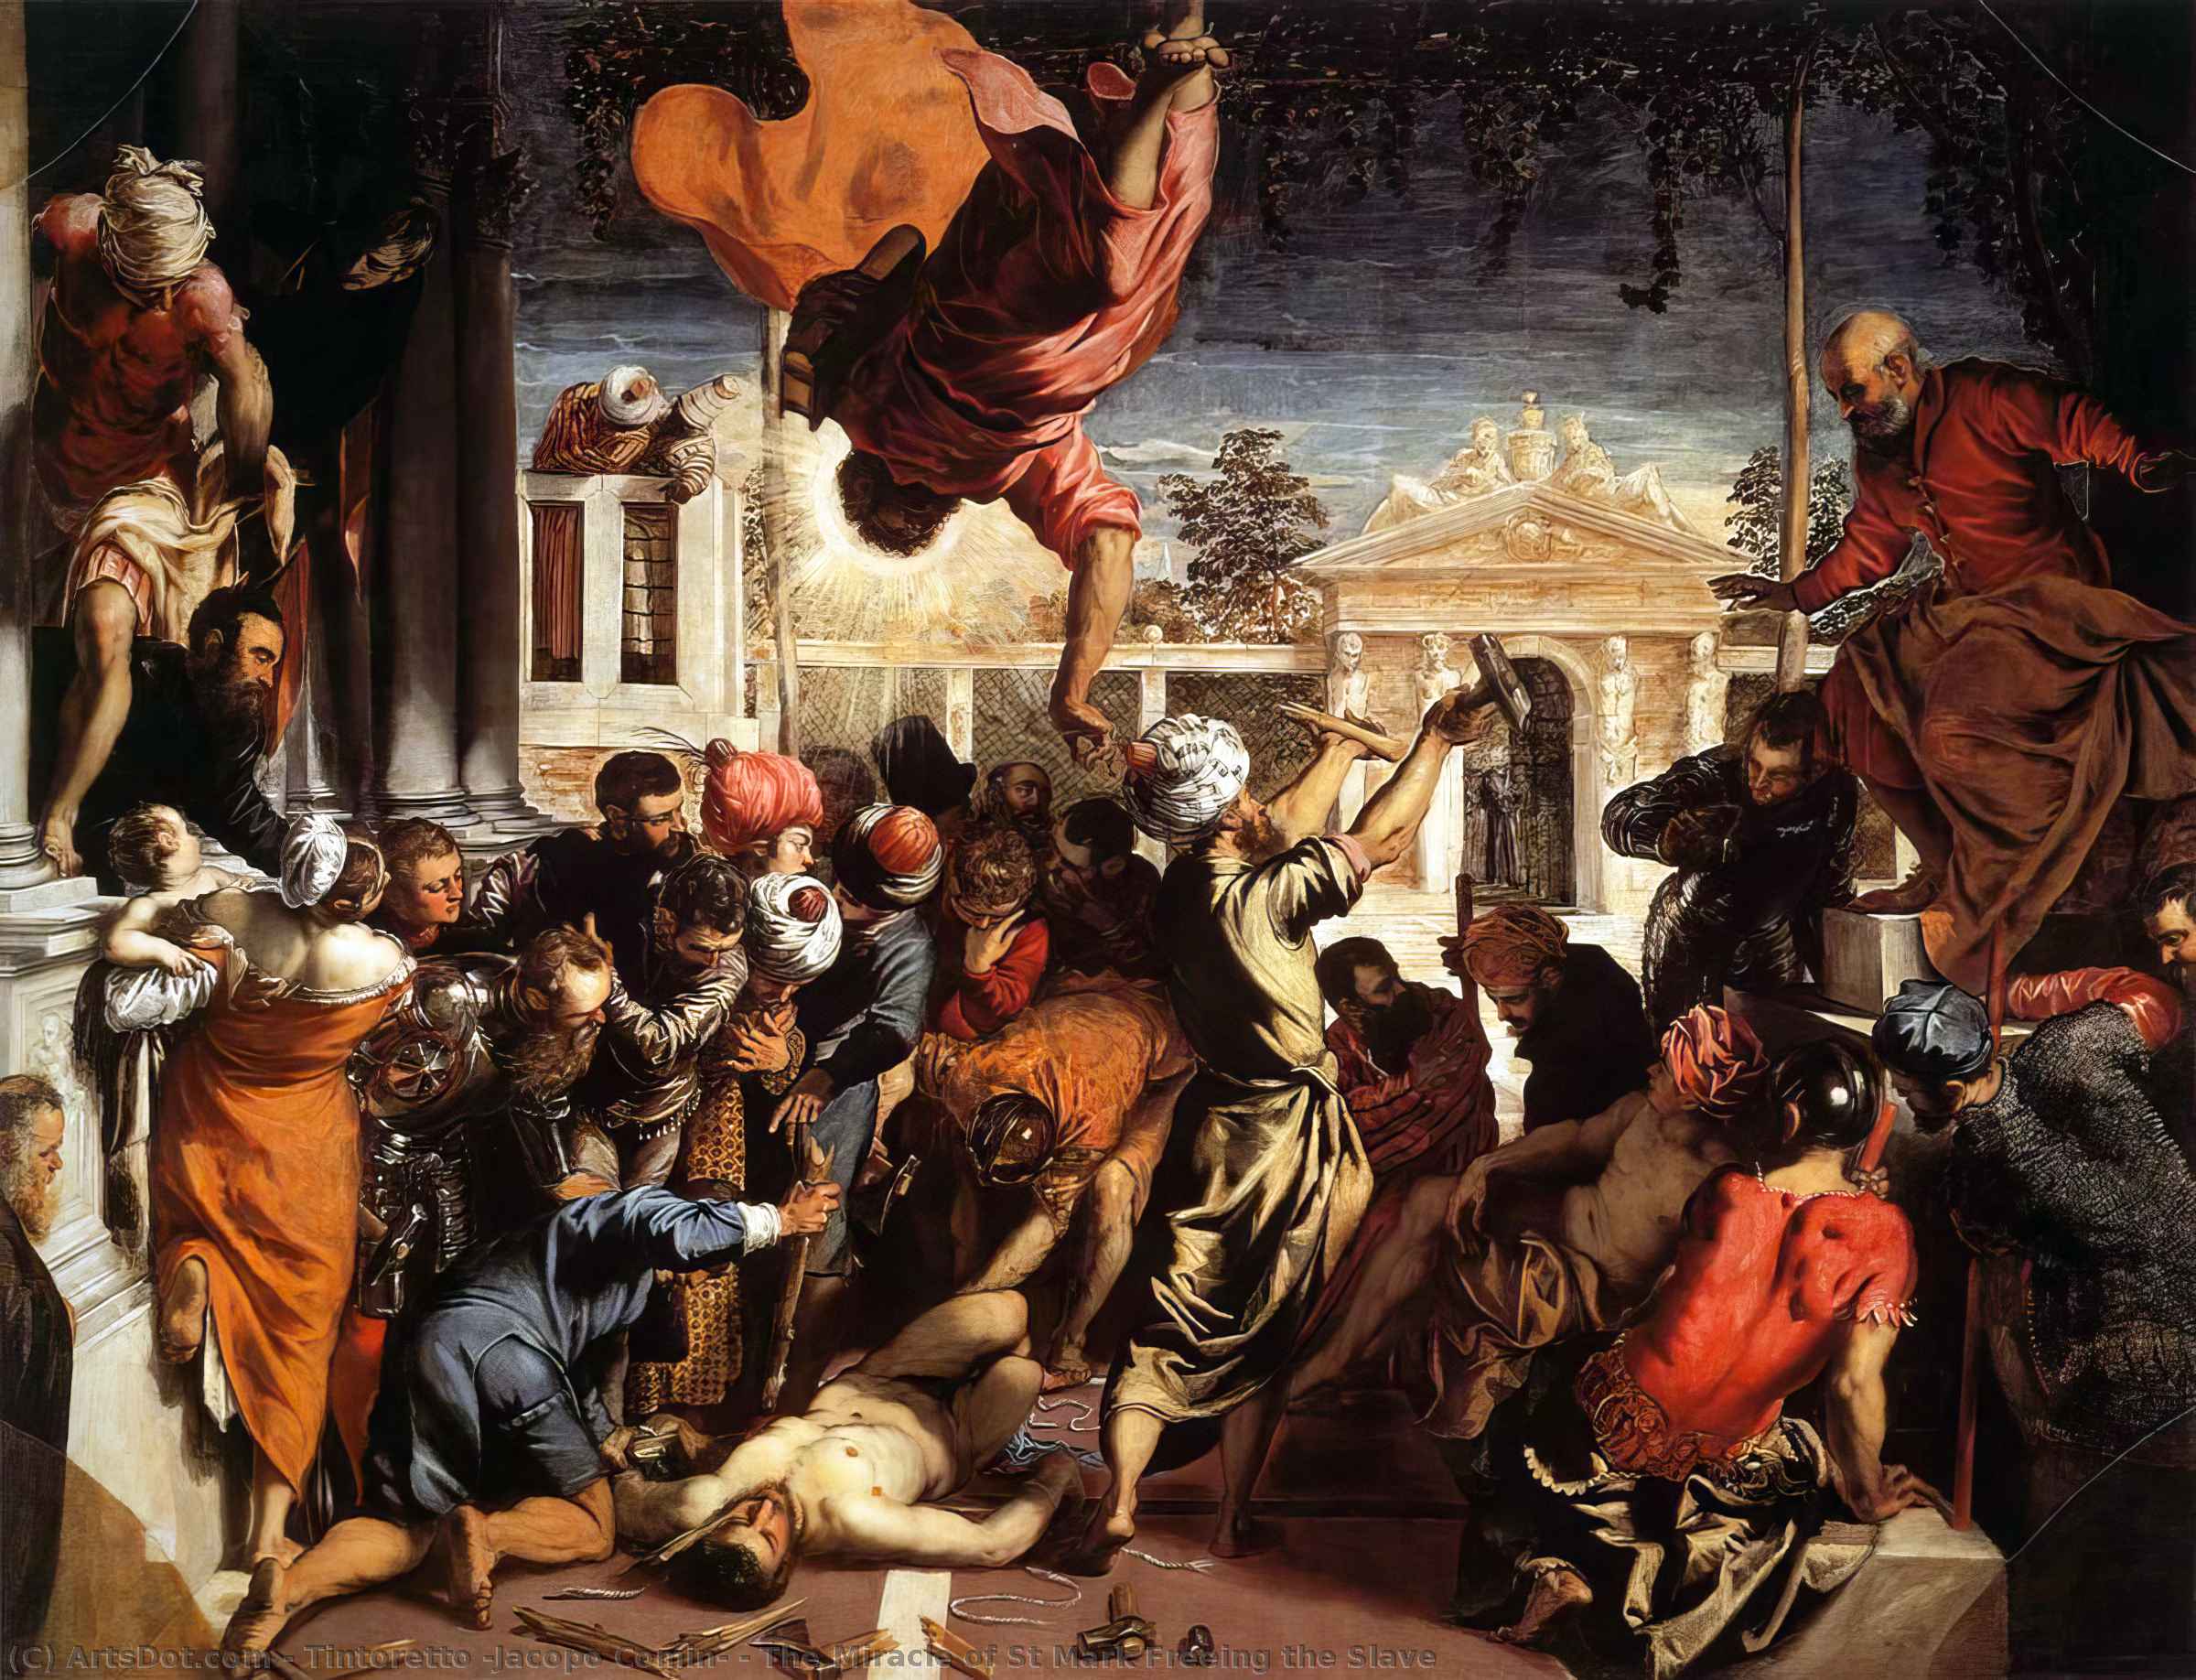 Order Paintings Reproductions The Miracle of St Mark Freeing the Slave, 1548 by Tintoretto (Jacopo Comin) (1518-1594, Italy) | ArtsDot.com